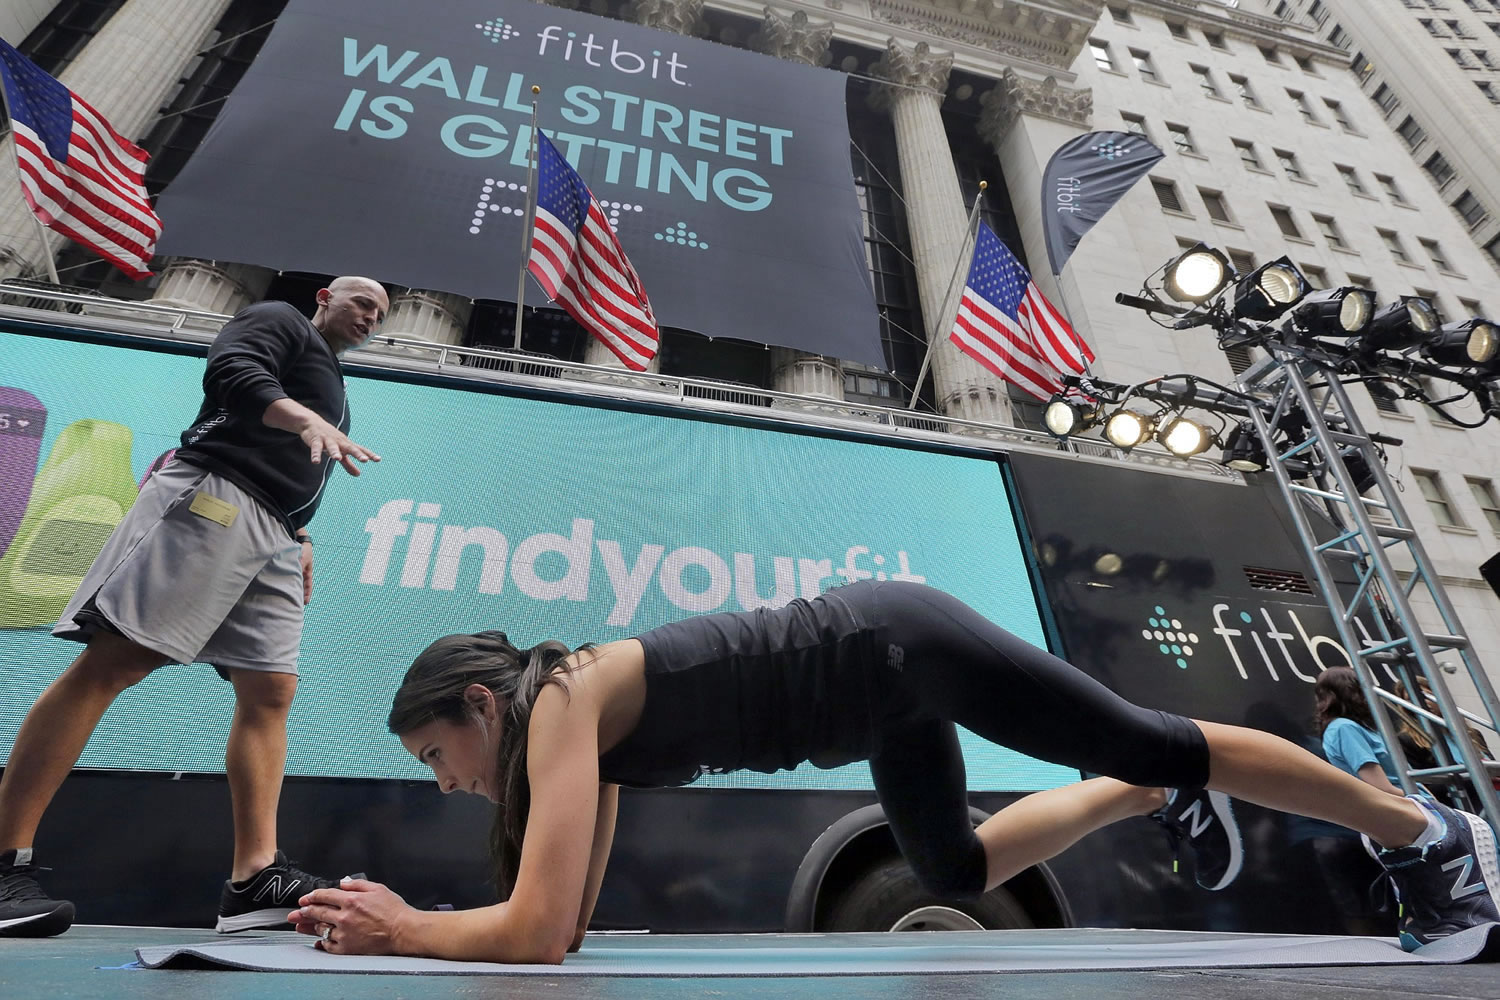 Fitness expert Harley Pasternak, left, and actress Jordana Brewster lead a workout for Fitbit on Thursday in front of the New York Stock Exchange in New York.